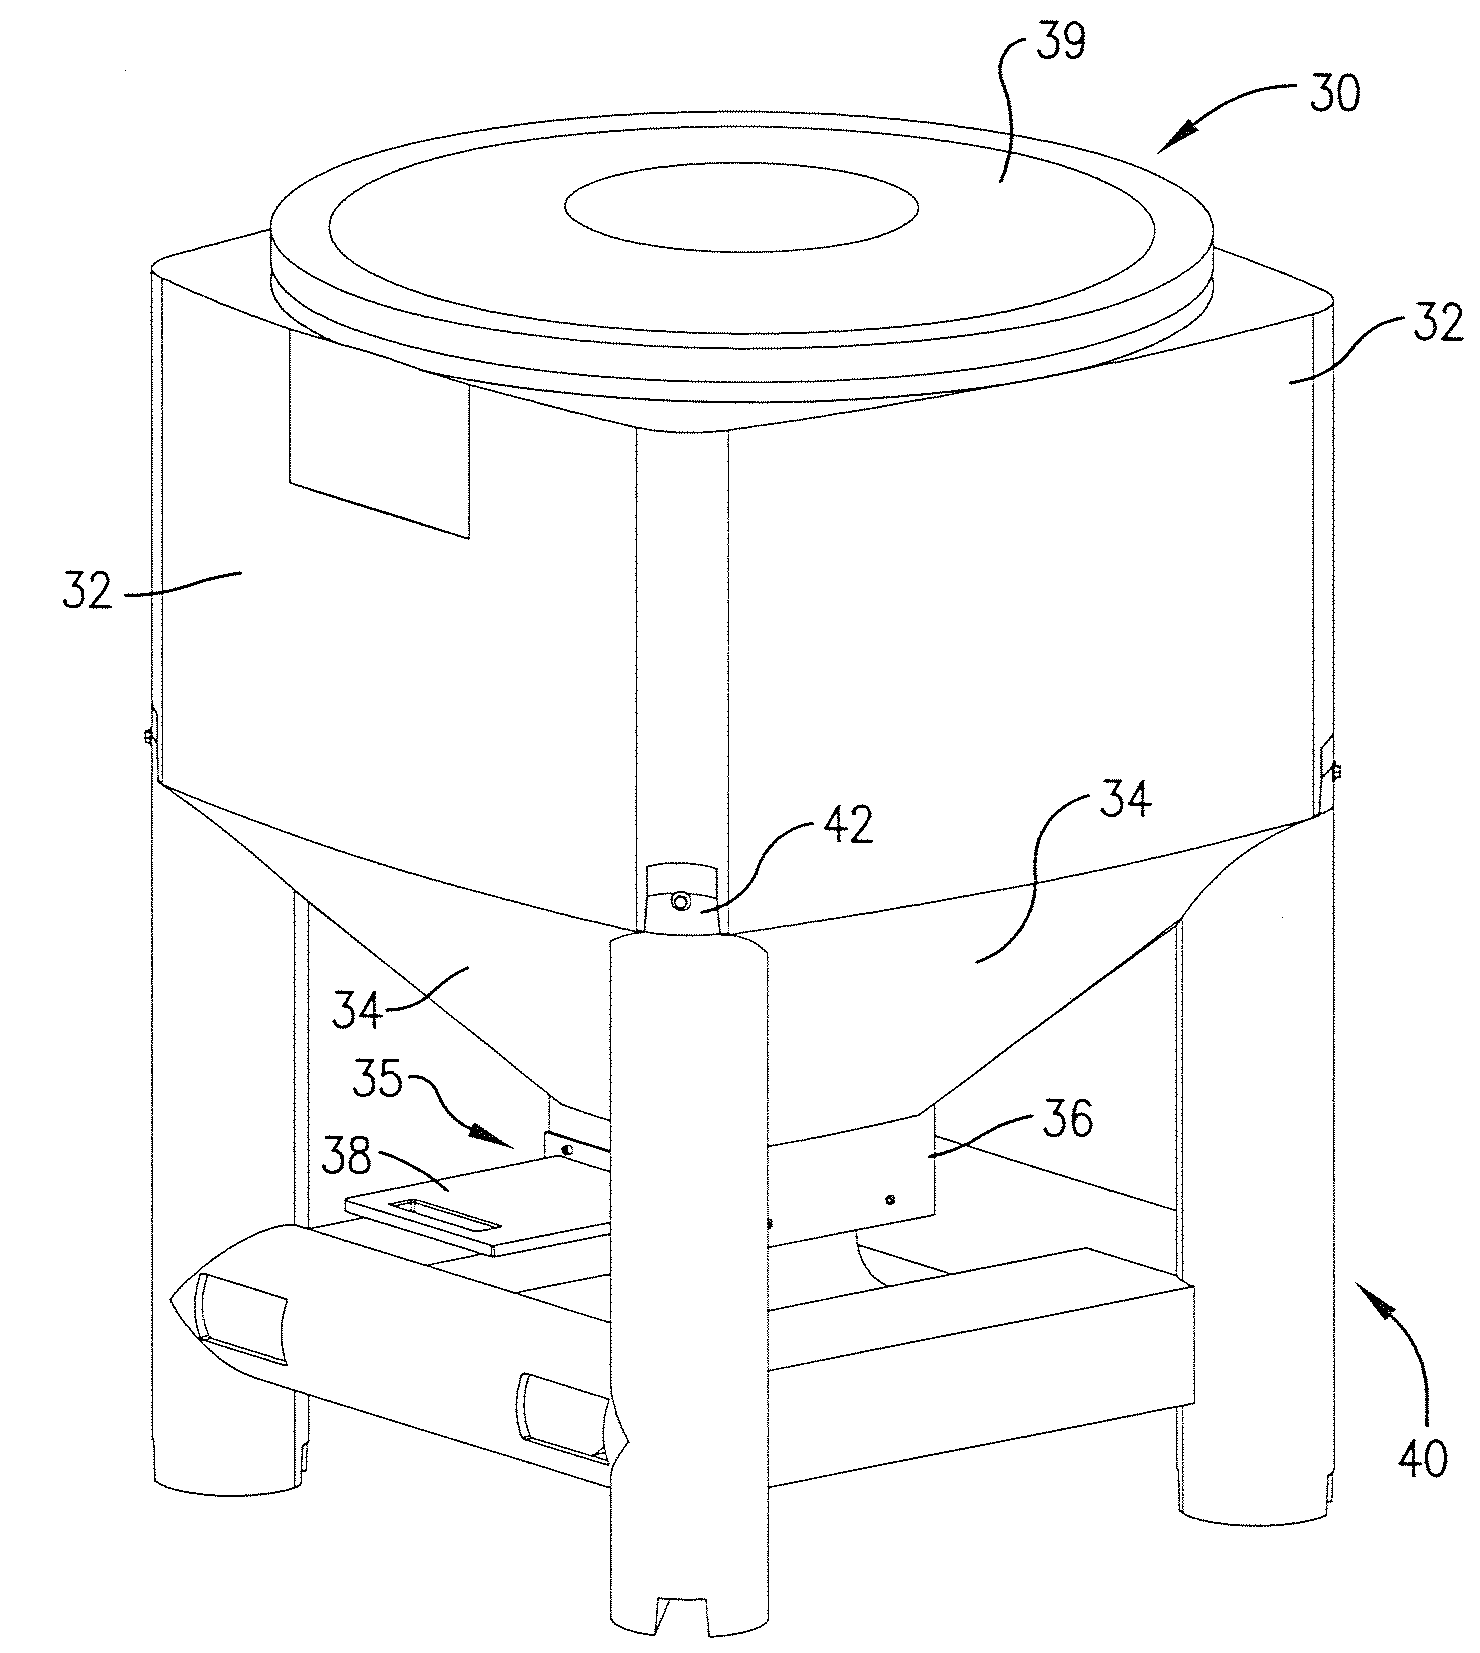 Hopper with slide discharge gate and method making the same